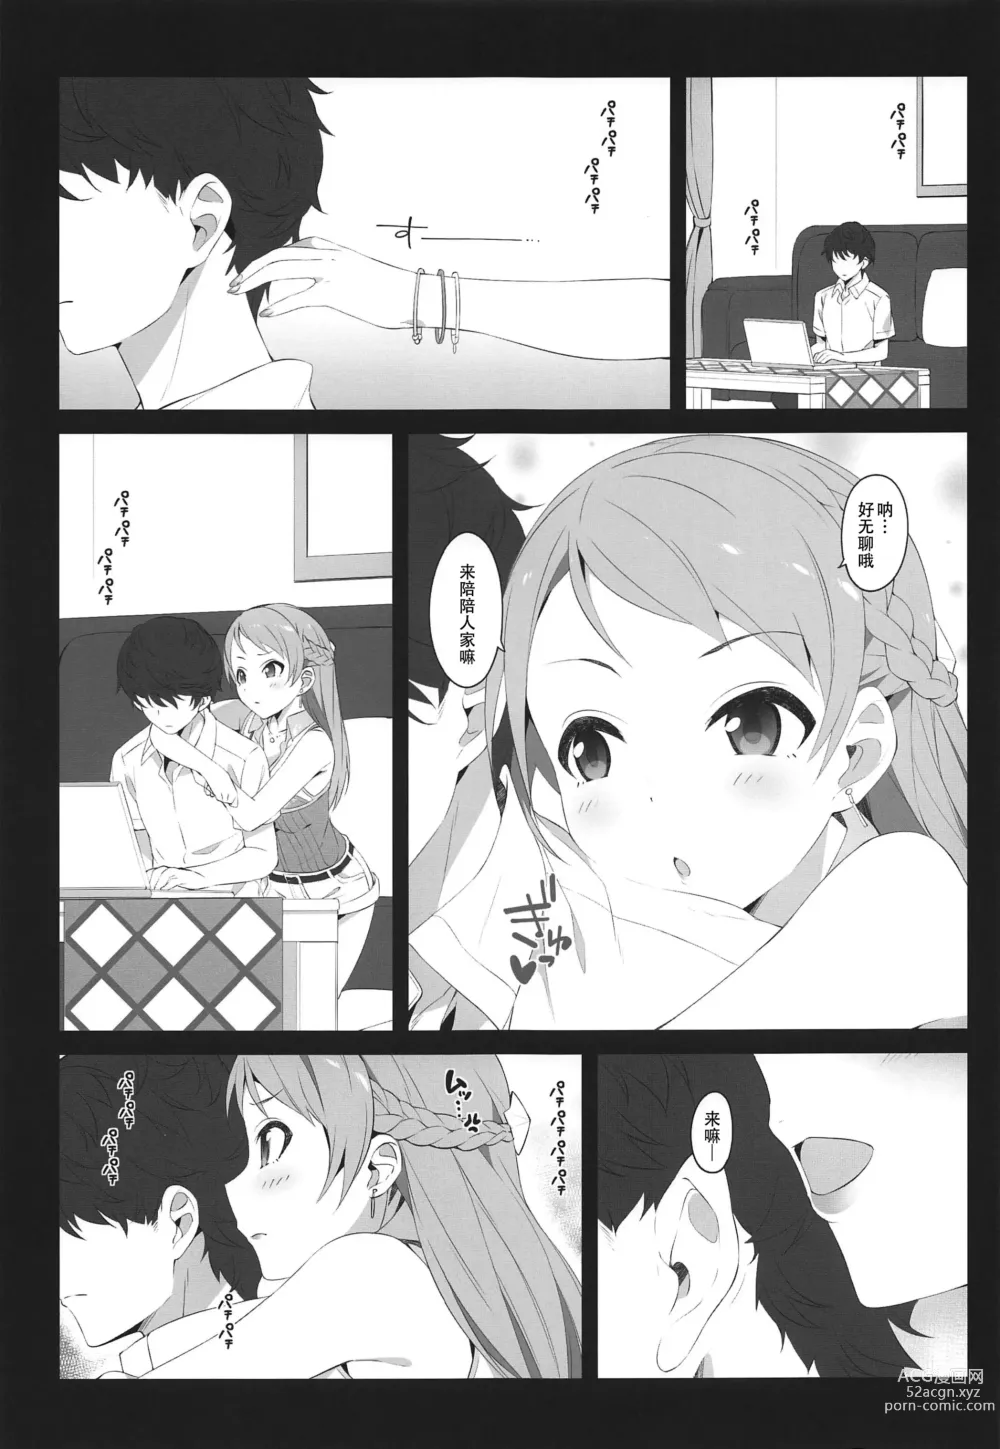 Page 13 of doujinshi Three stars have a dream with sparkles.